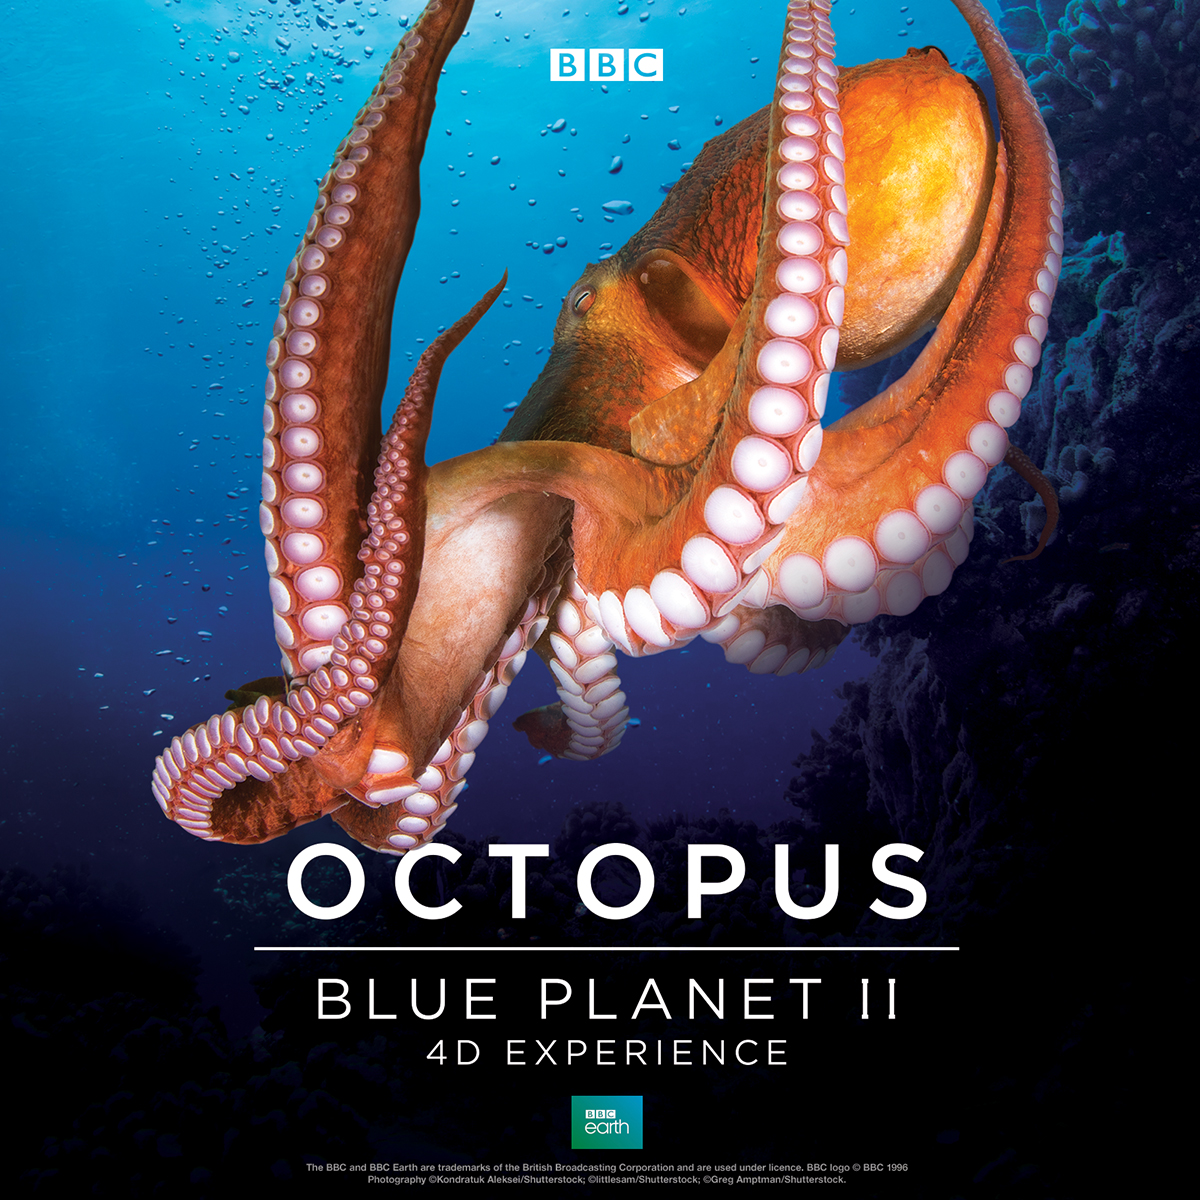 planet earth 2 octopus poster